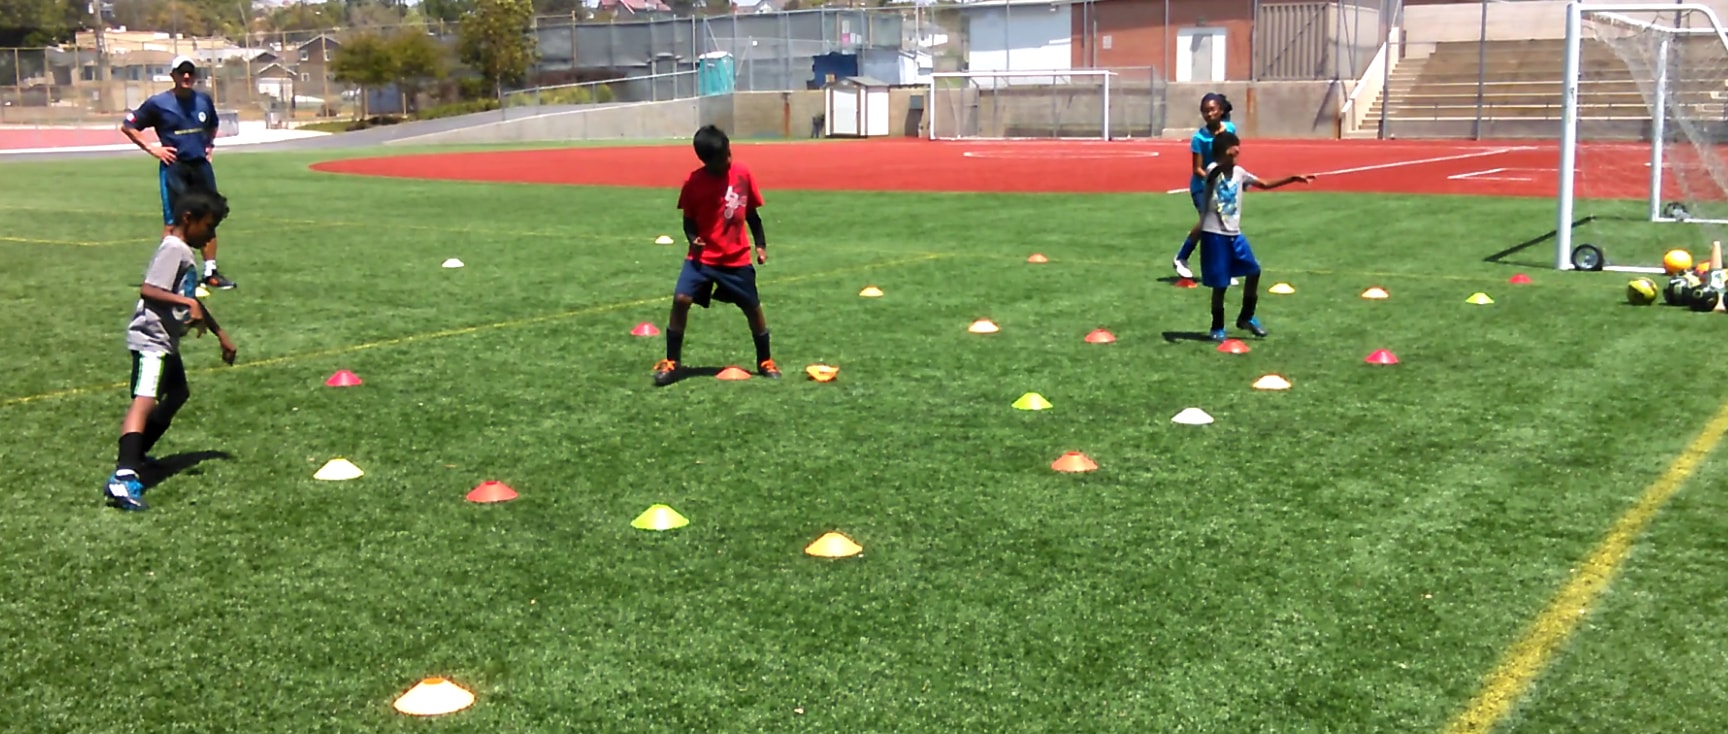 image of Brazil soccer USA soccer clinics for youth